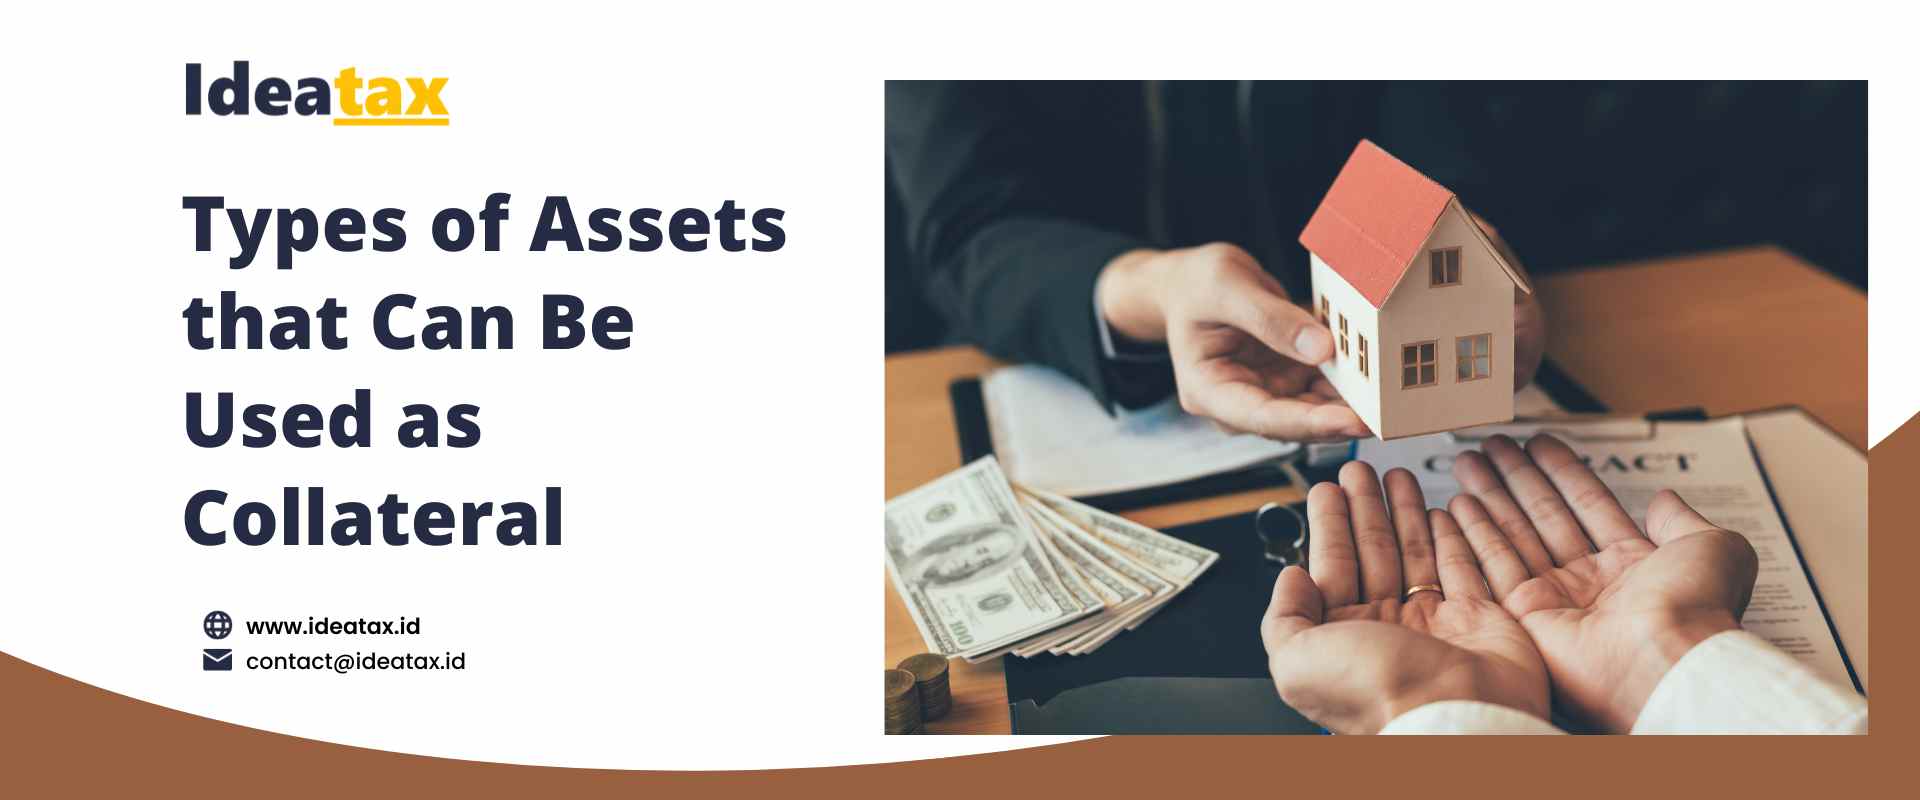 Types of Assets that Can Be Used as Collateral